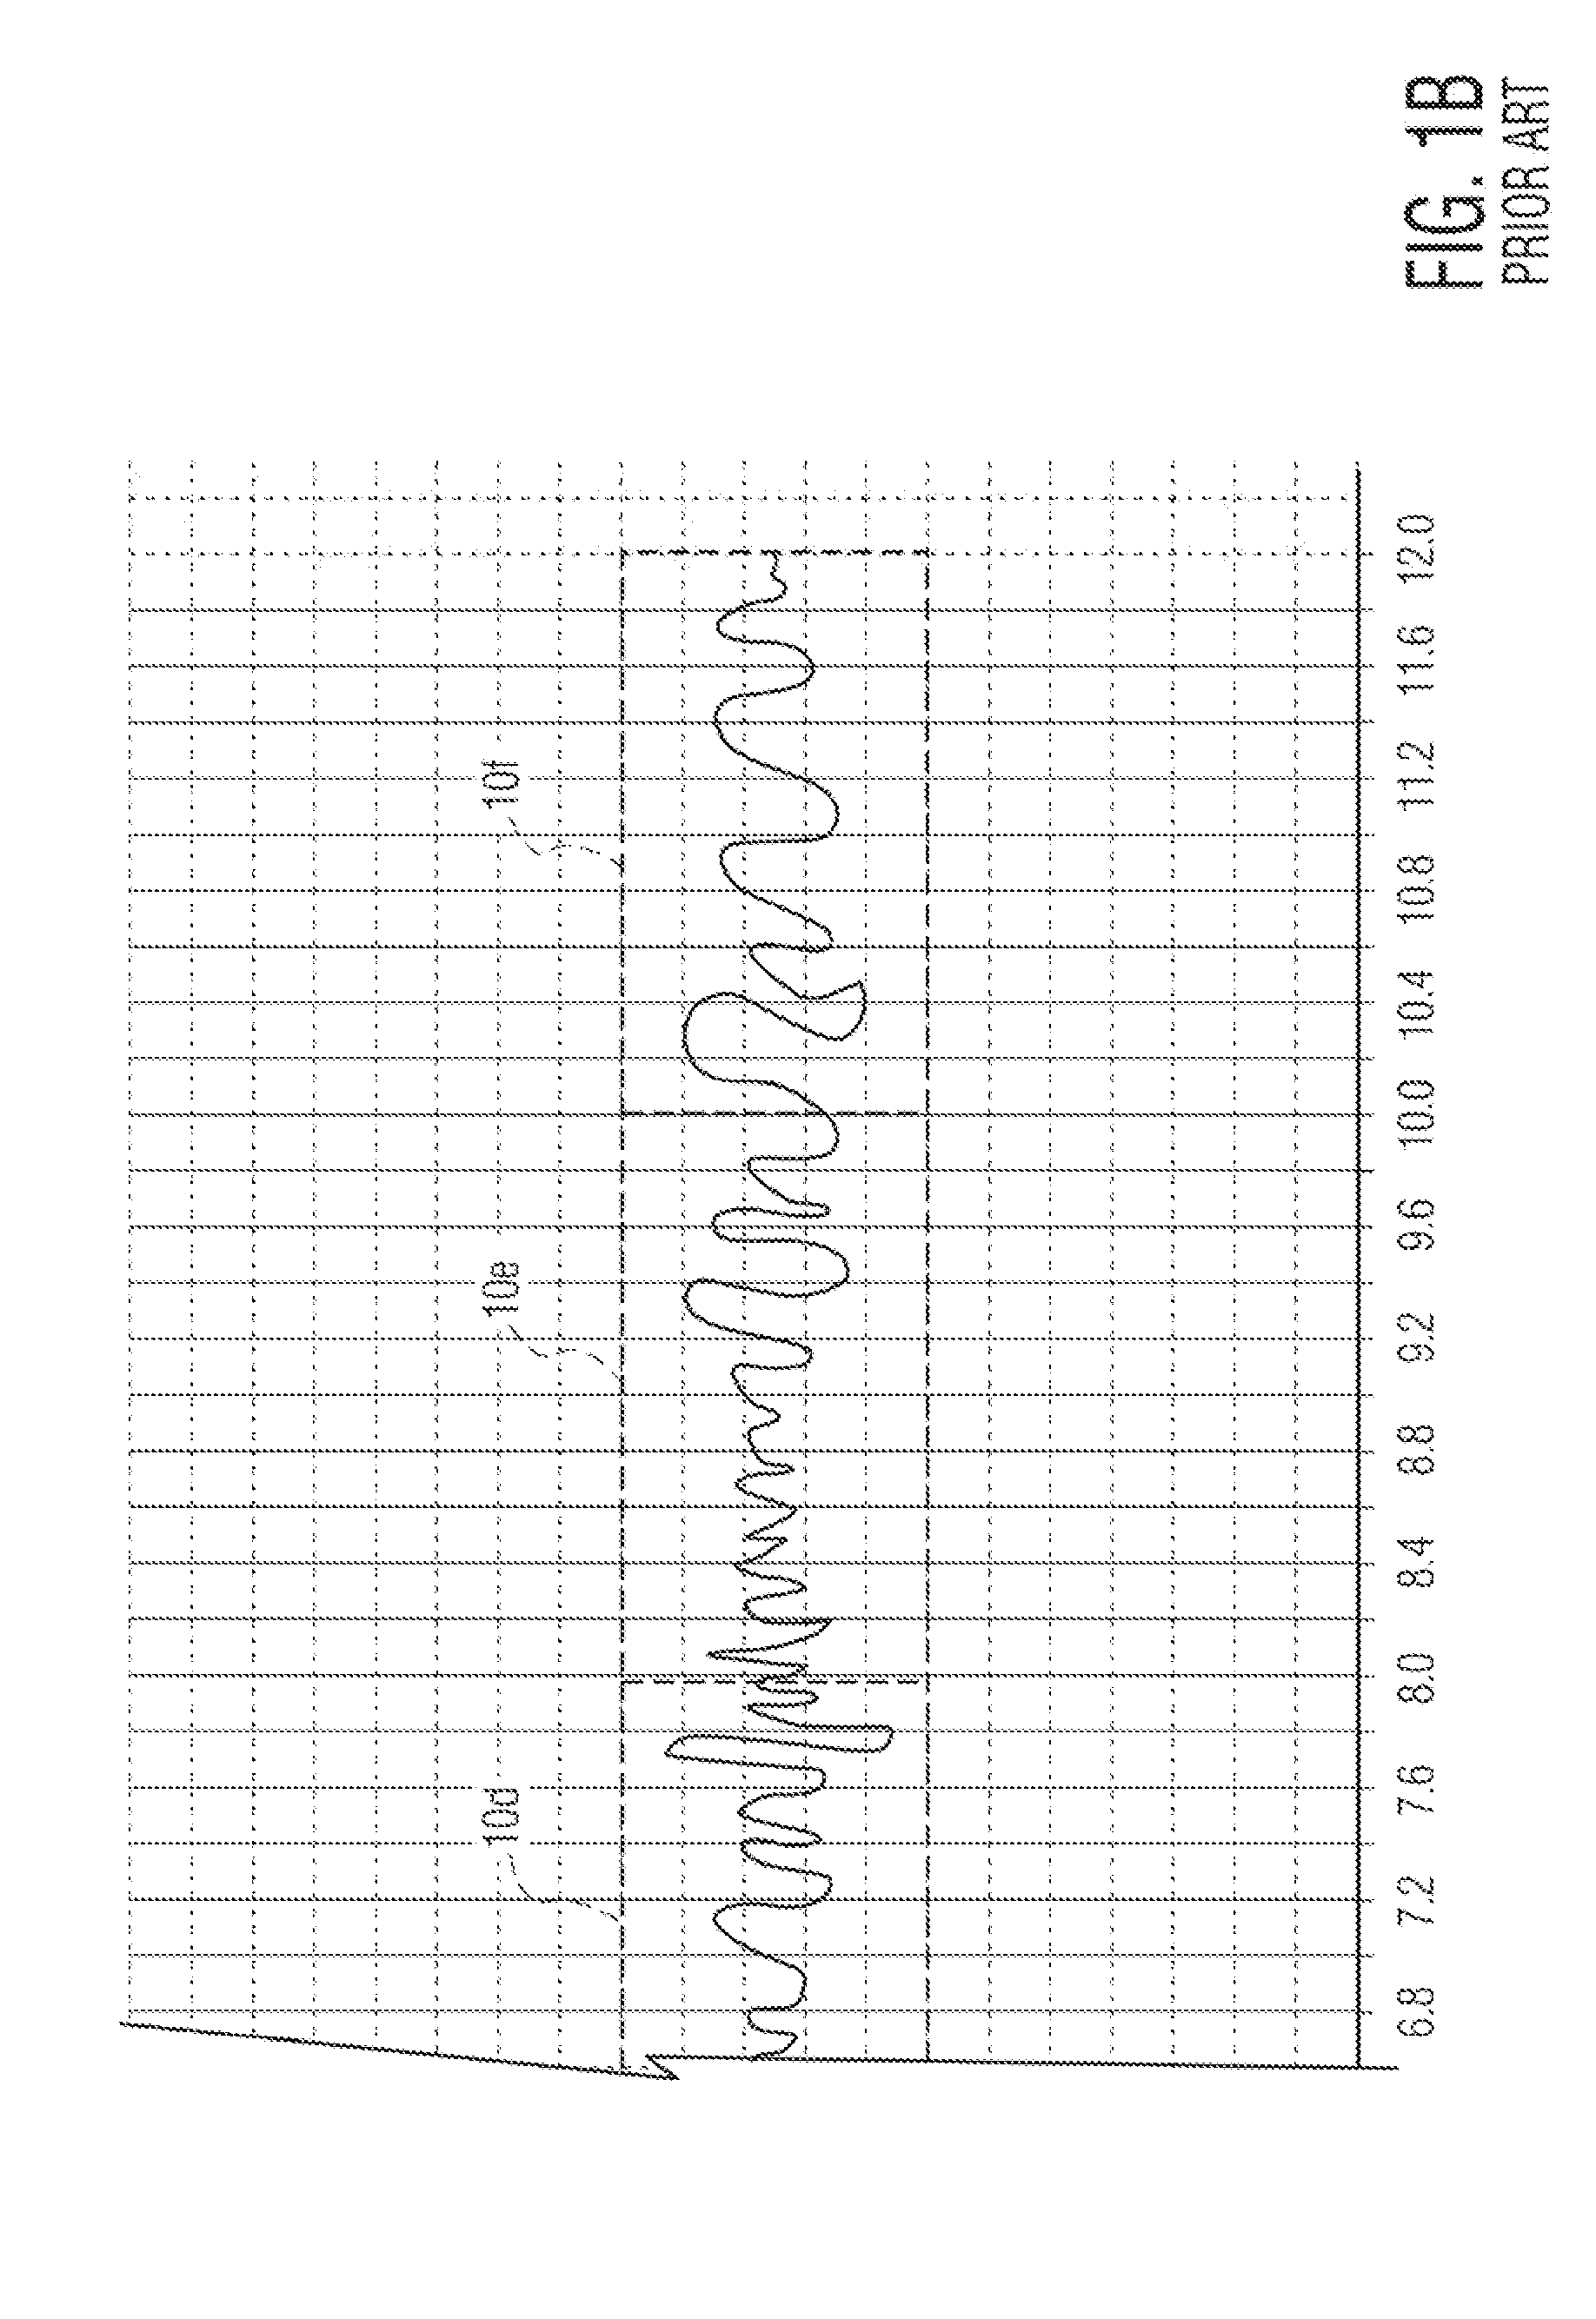 Circuit and method for analyzing a patient's heart function using overlapping analysis windows